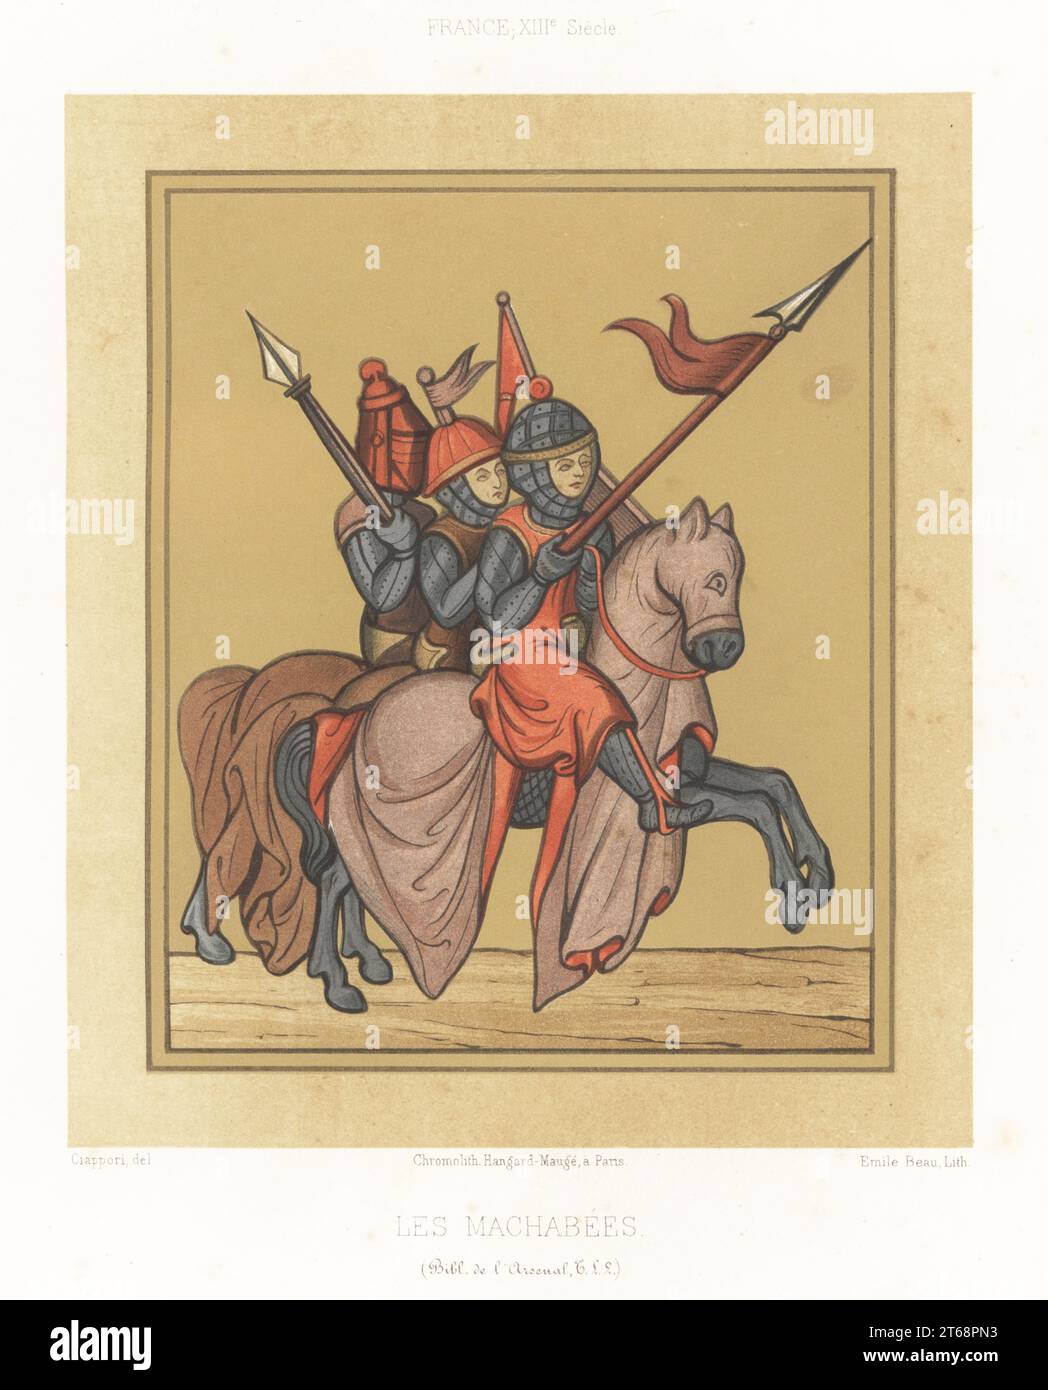 Maccabees in armour on horseback, 13th century. Three sons of Mathathias in the Maccabean Revolt, 2nd century. Judas Maccabeus in visor helmet with mace, others in conical helmets, chainmail armour, riding caparisoned horses. From the Book of Maccabees in a manuscript Bible, MS T.L.2, Bibliotheque de l'Arsenal. Les Machabees, France, XIIIe Siecle. Chromolithograph by Emile Beau after an illustration by Claudius Joseph Ciappori from Charles Louandres Les Arts Somptuaires, The Sumptuary Arts, Hangard-Mauge, Paris, 1858. Stock Photo